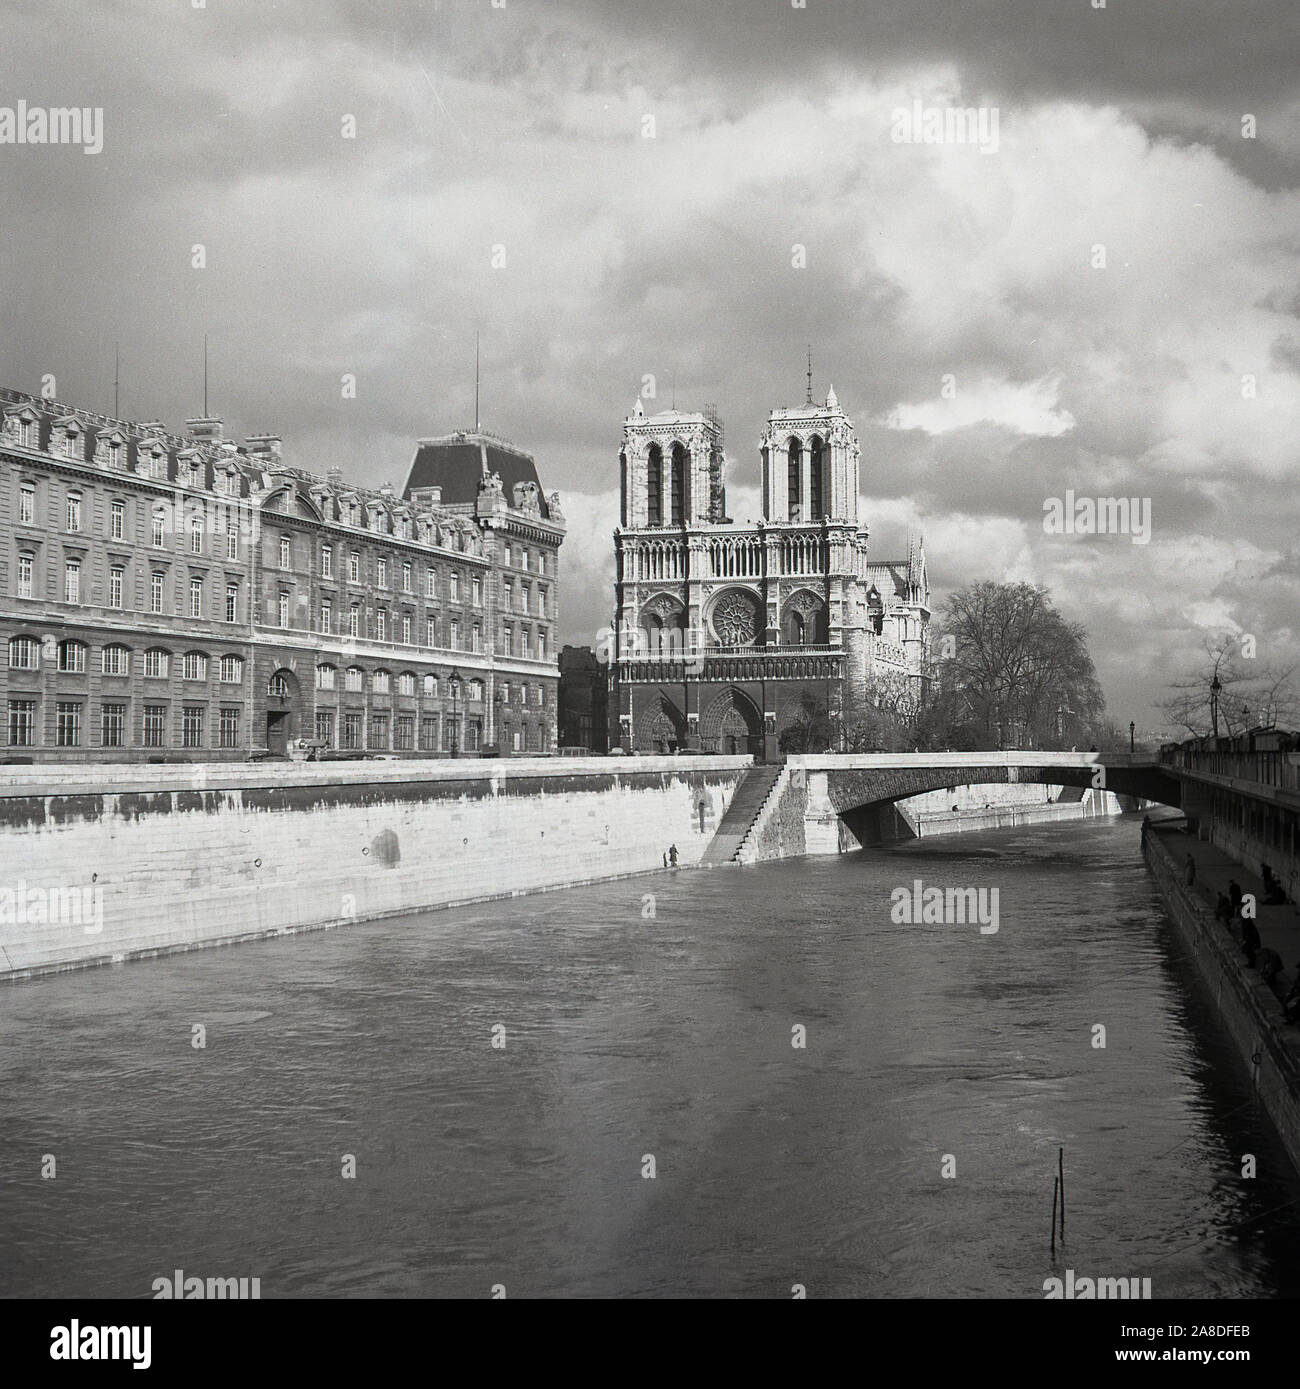 1950s, historical, View from Pont au Double across the river Seine to The Notre-Dame Cathedral, Paris, France. A medieval Catholic church on the IIe de la Cite in the 4th arrondissement of Paris, it is considered one of the finest examples of French Gothic architecture. Stock Photo